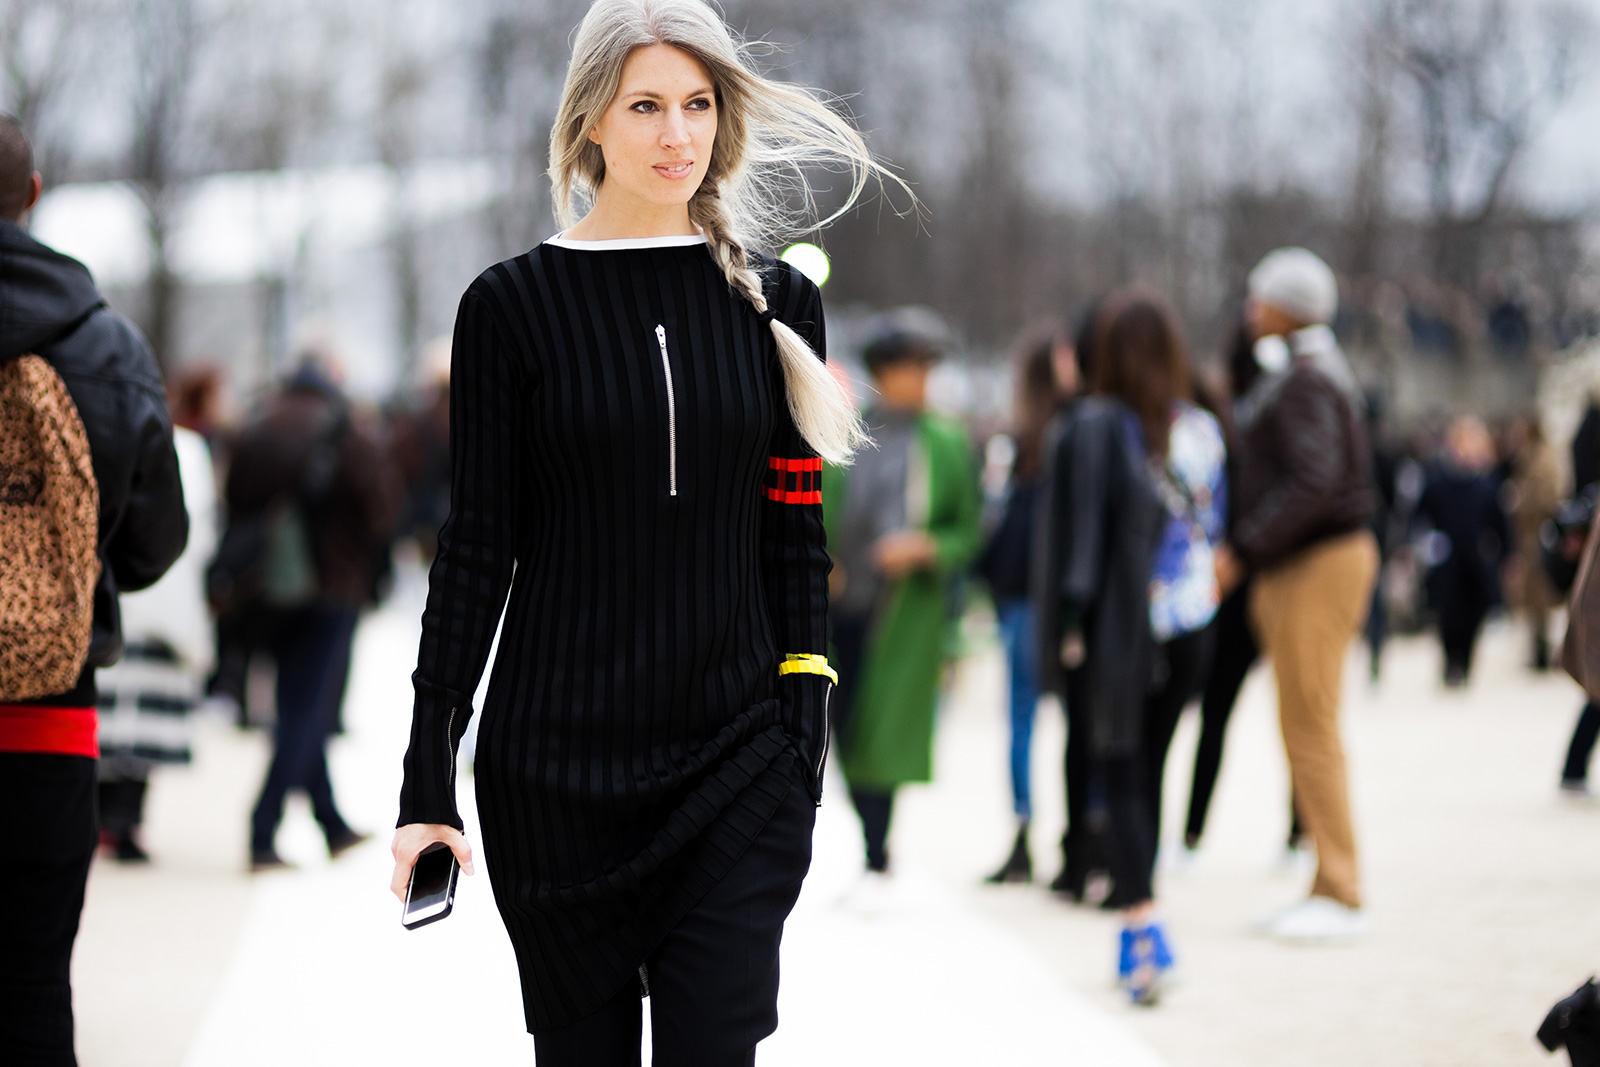 Sarah Harris wearing a black Celine top before the Valentino Fall 2015 fashion show at the Tuileries in Paris, France